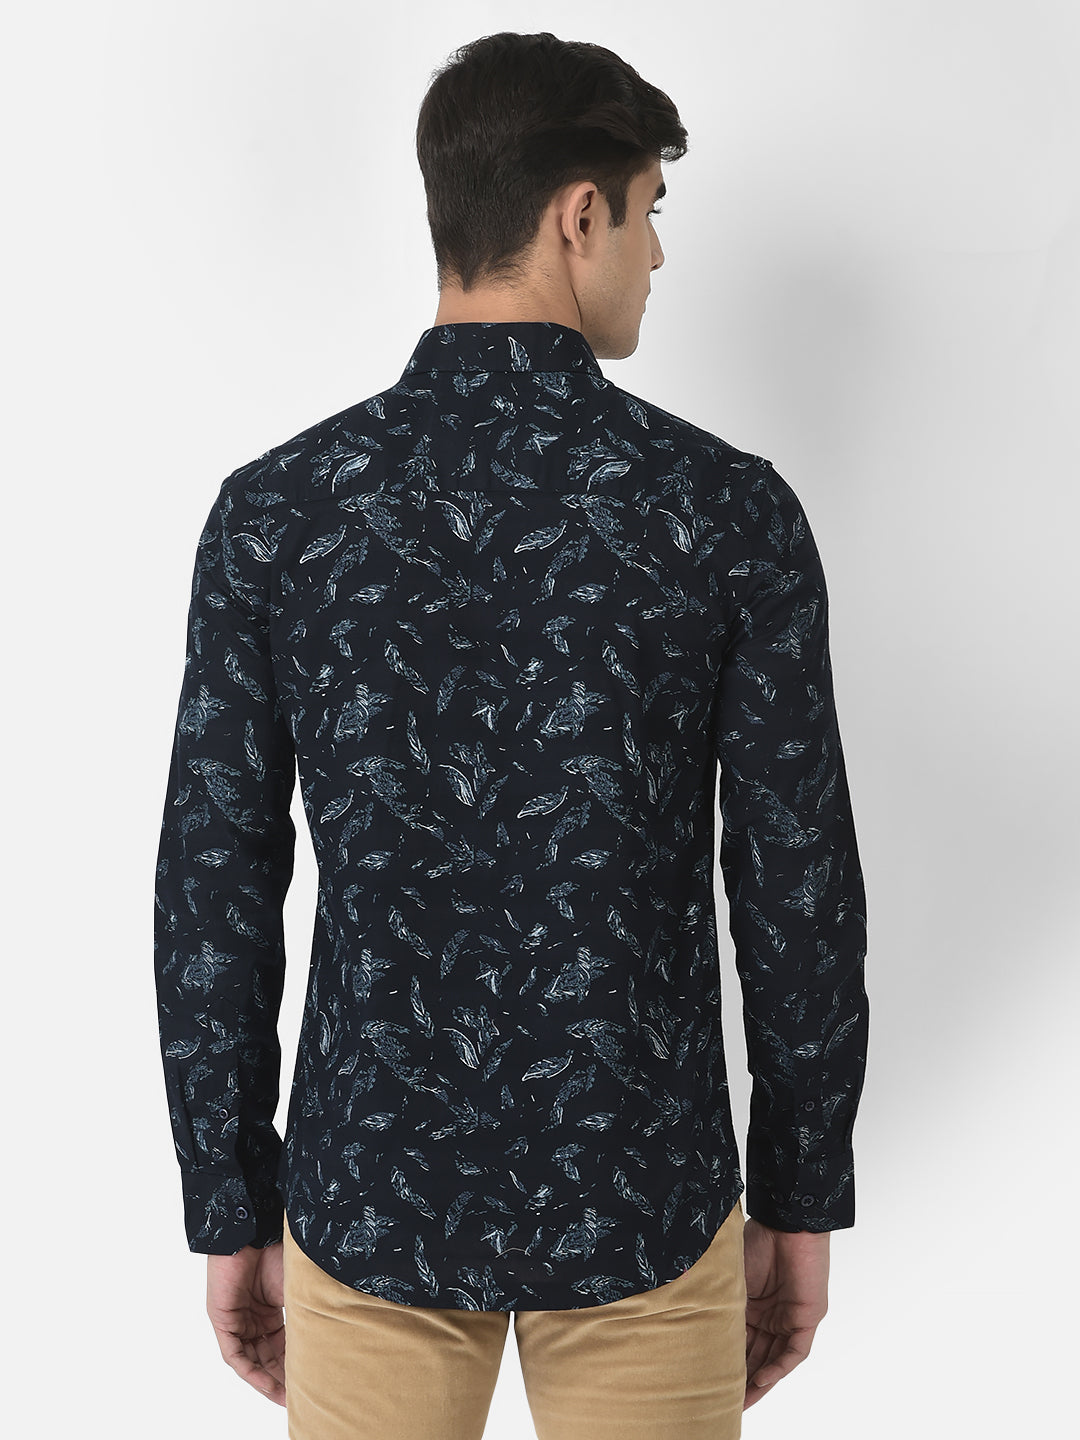  Navy Blue Shirt in Floral Print 